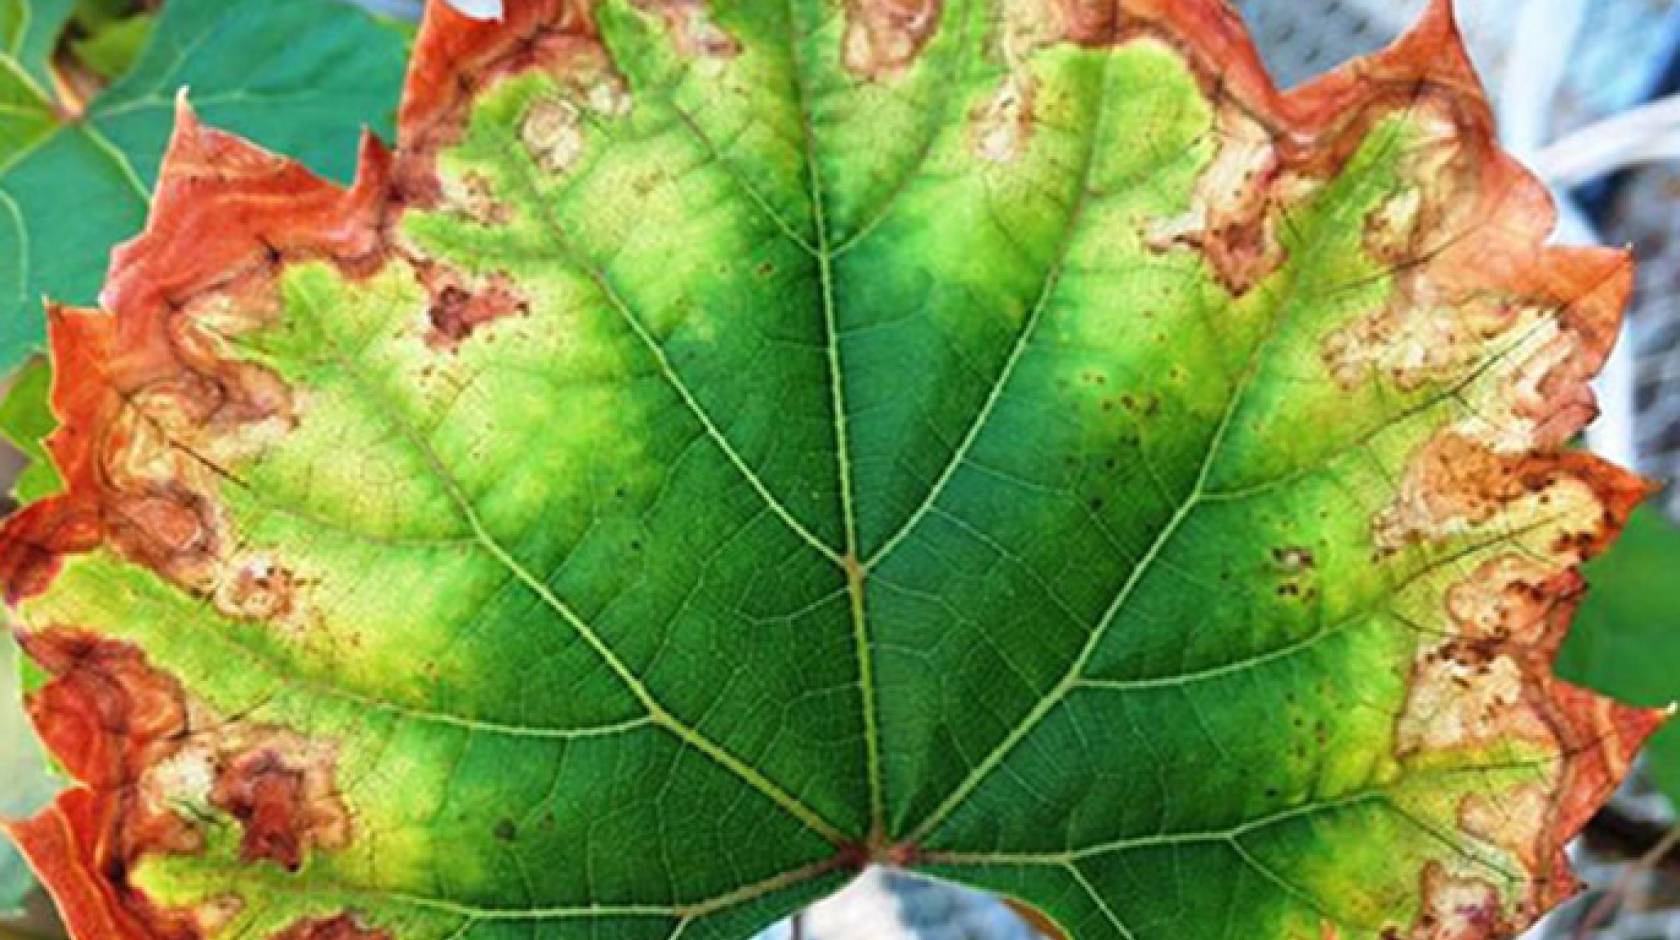 An enzyme appears to enable Xyllela fastidiosa bacteria to infect grapevines with Pierce's disease, causing serious leaf damage as pictured here. 